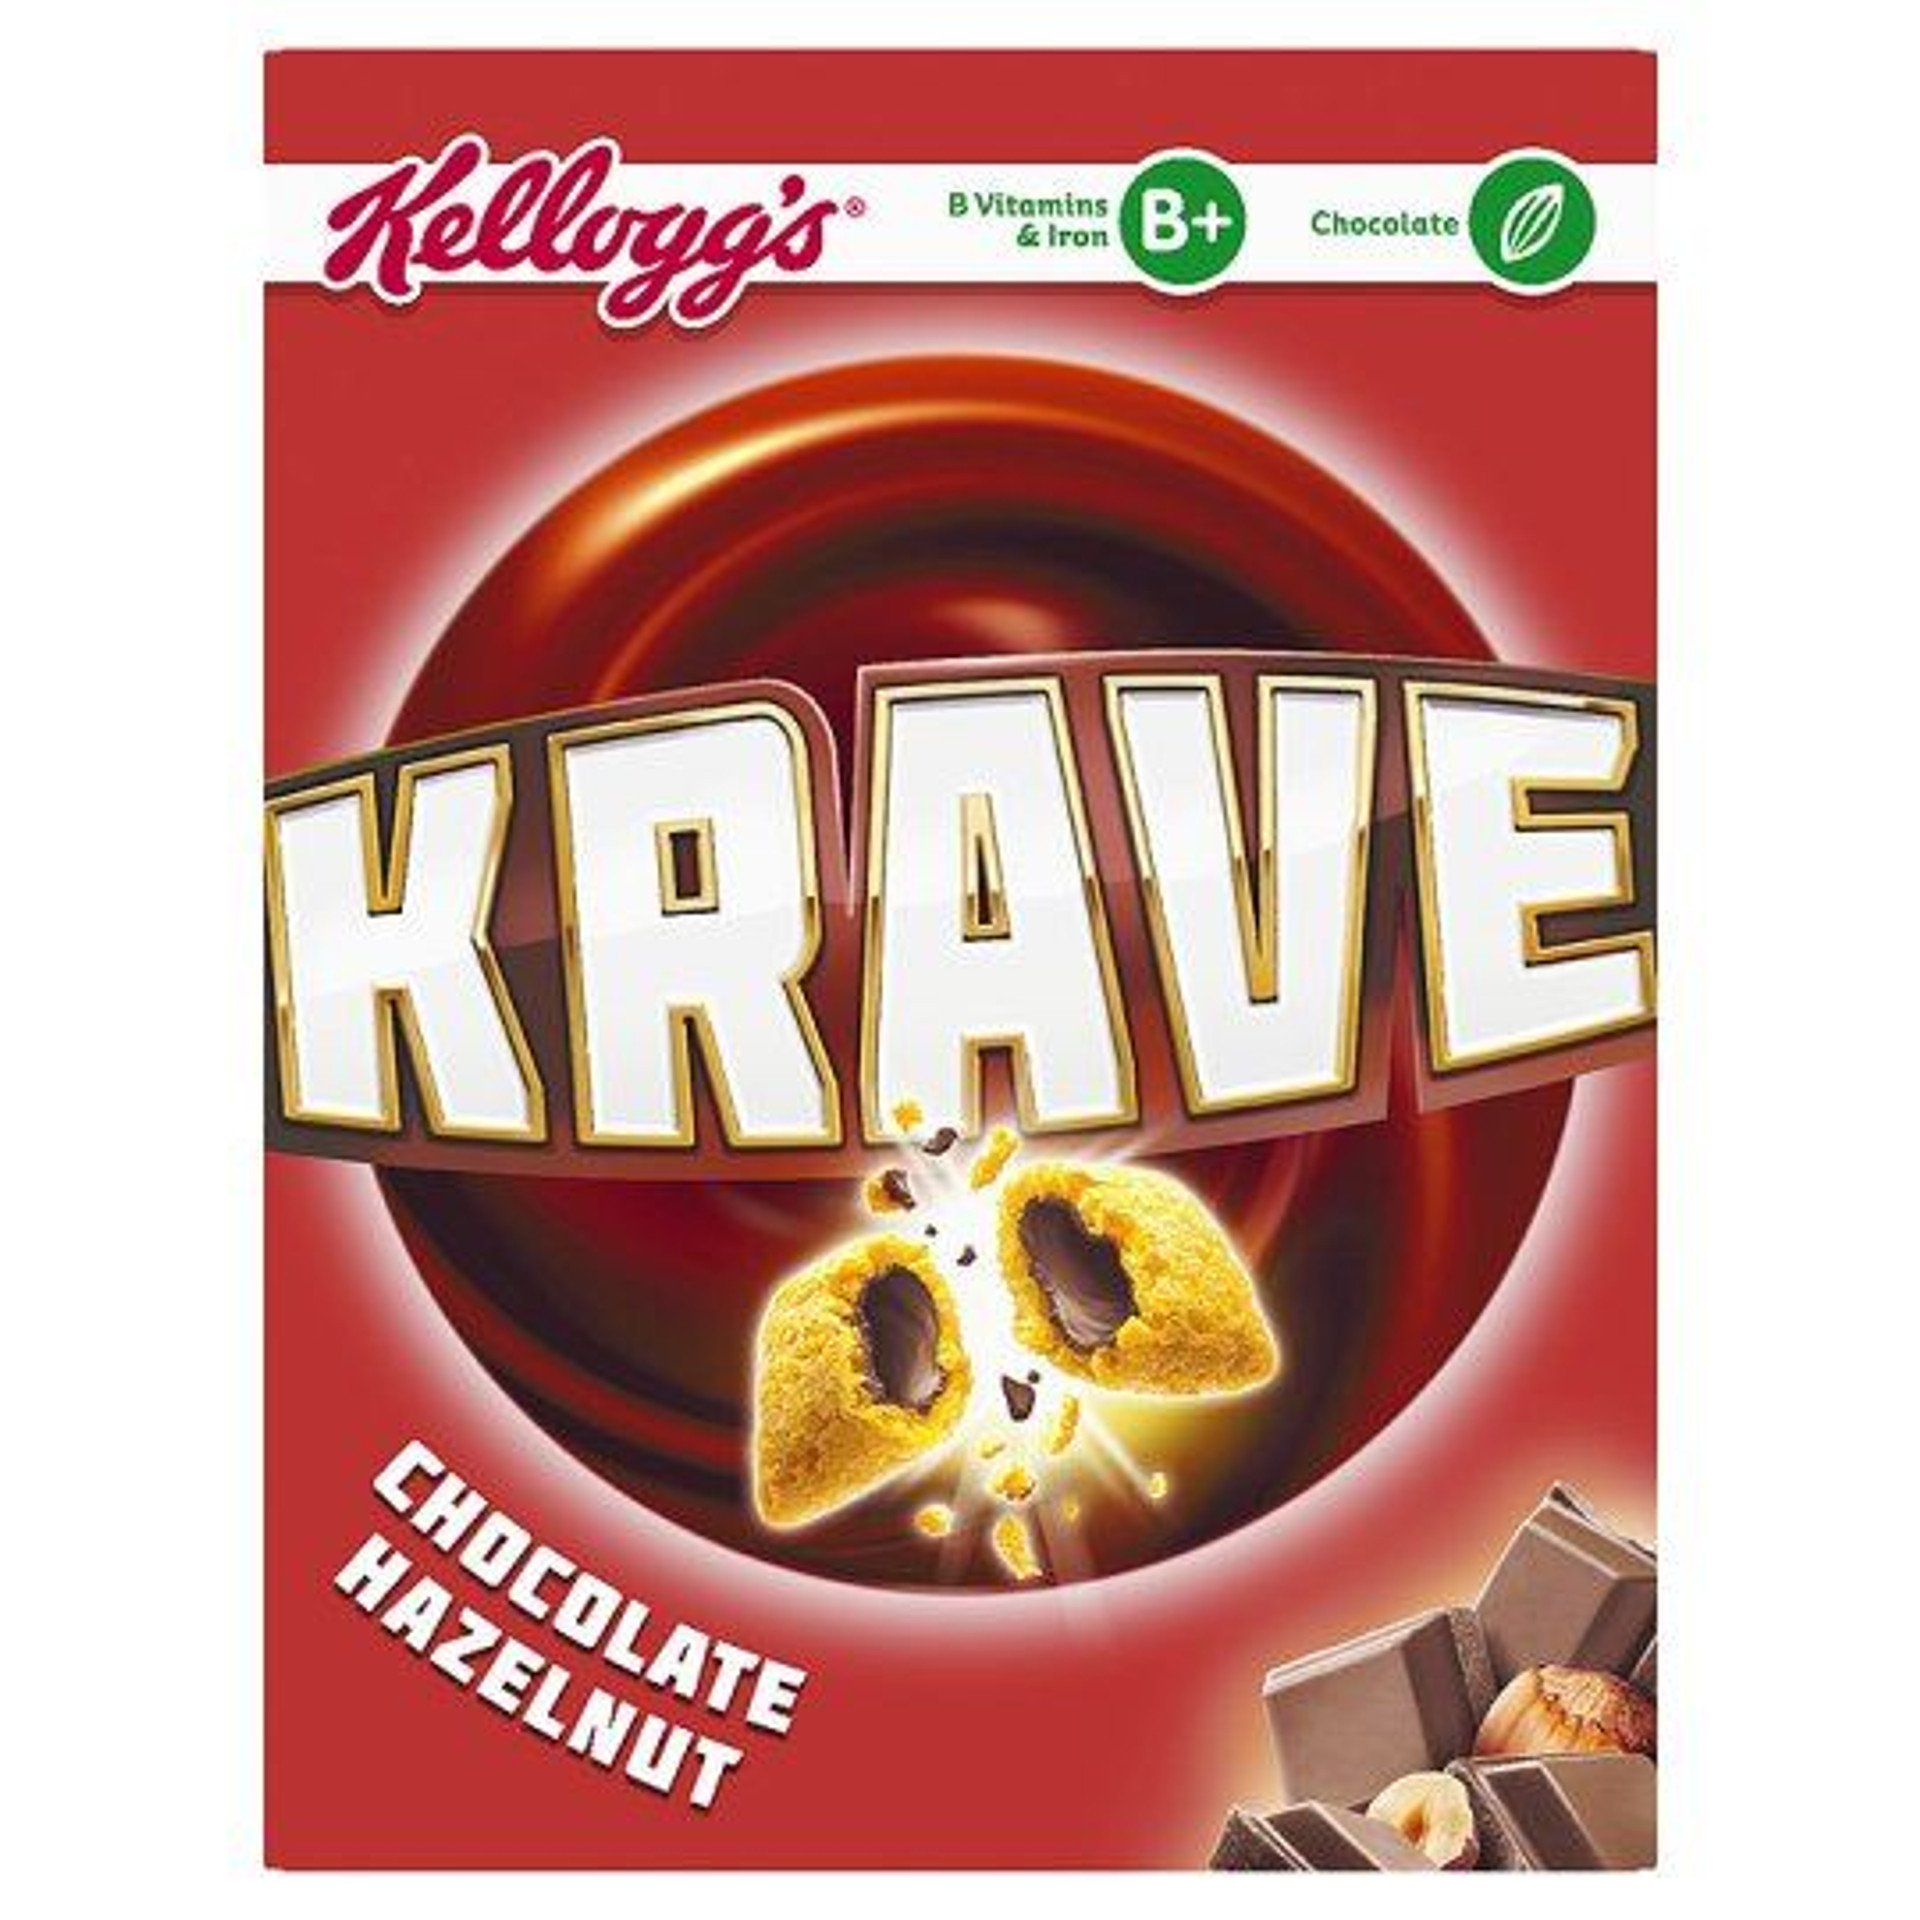 Kellogg S Krave Cereal Chocolate Hazelnut 375g Pack Of 2 375g X 2 Boxes